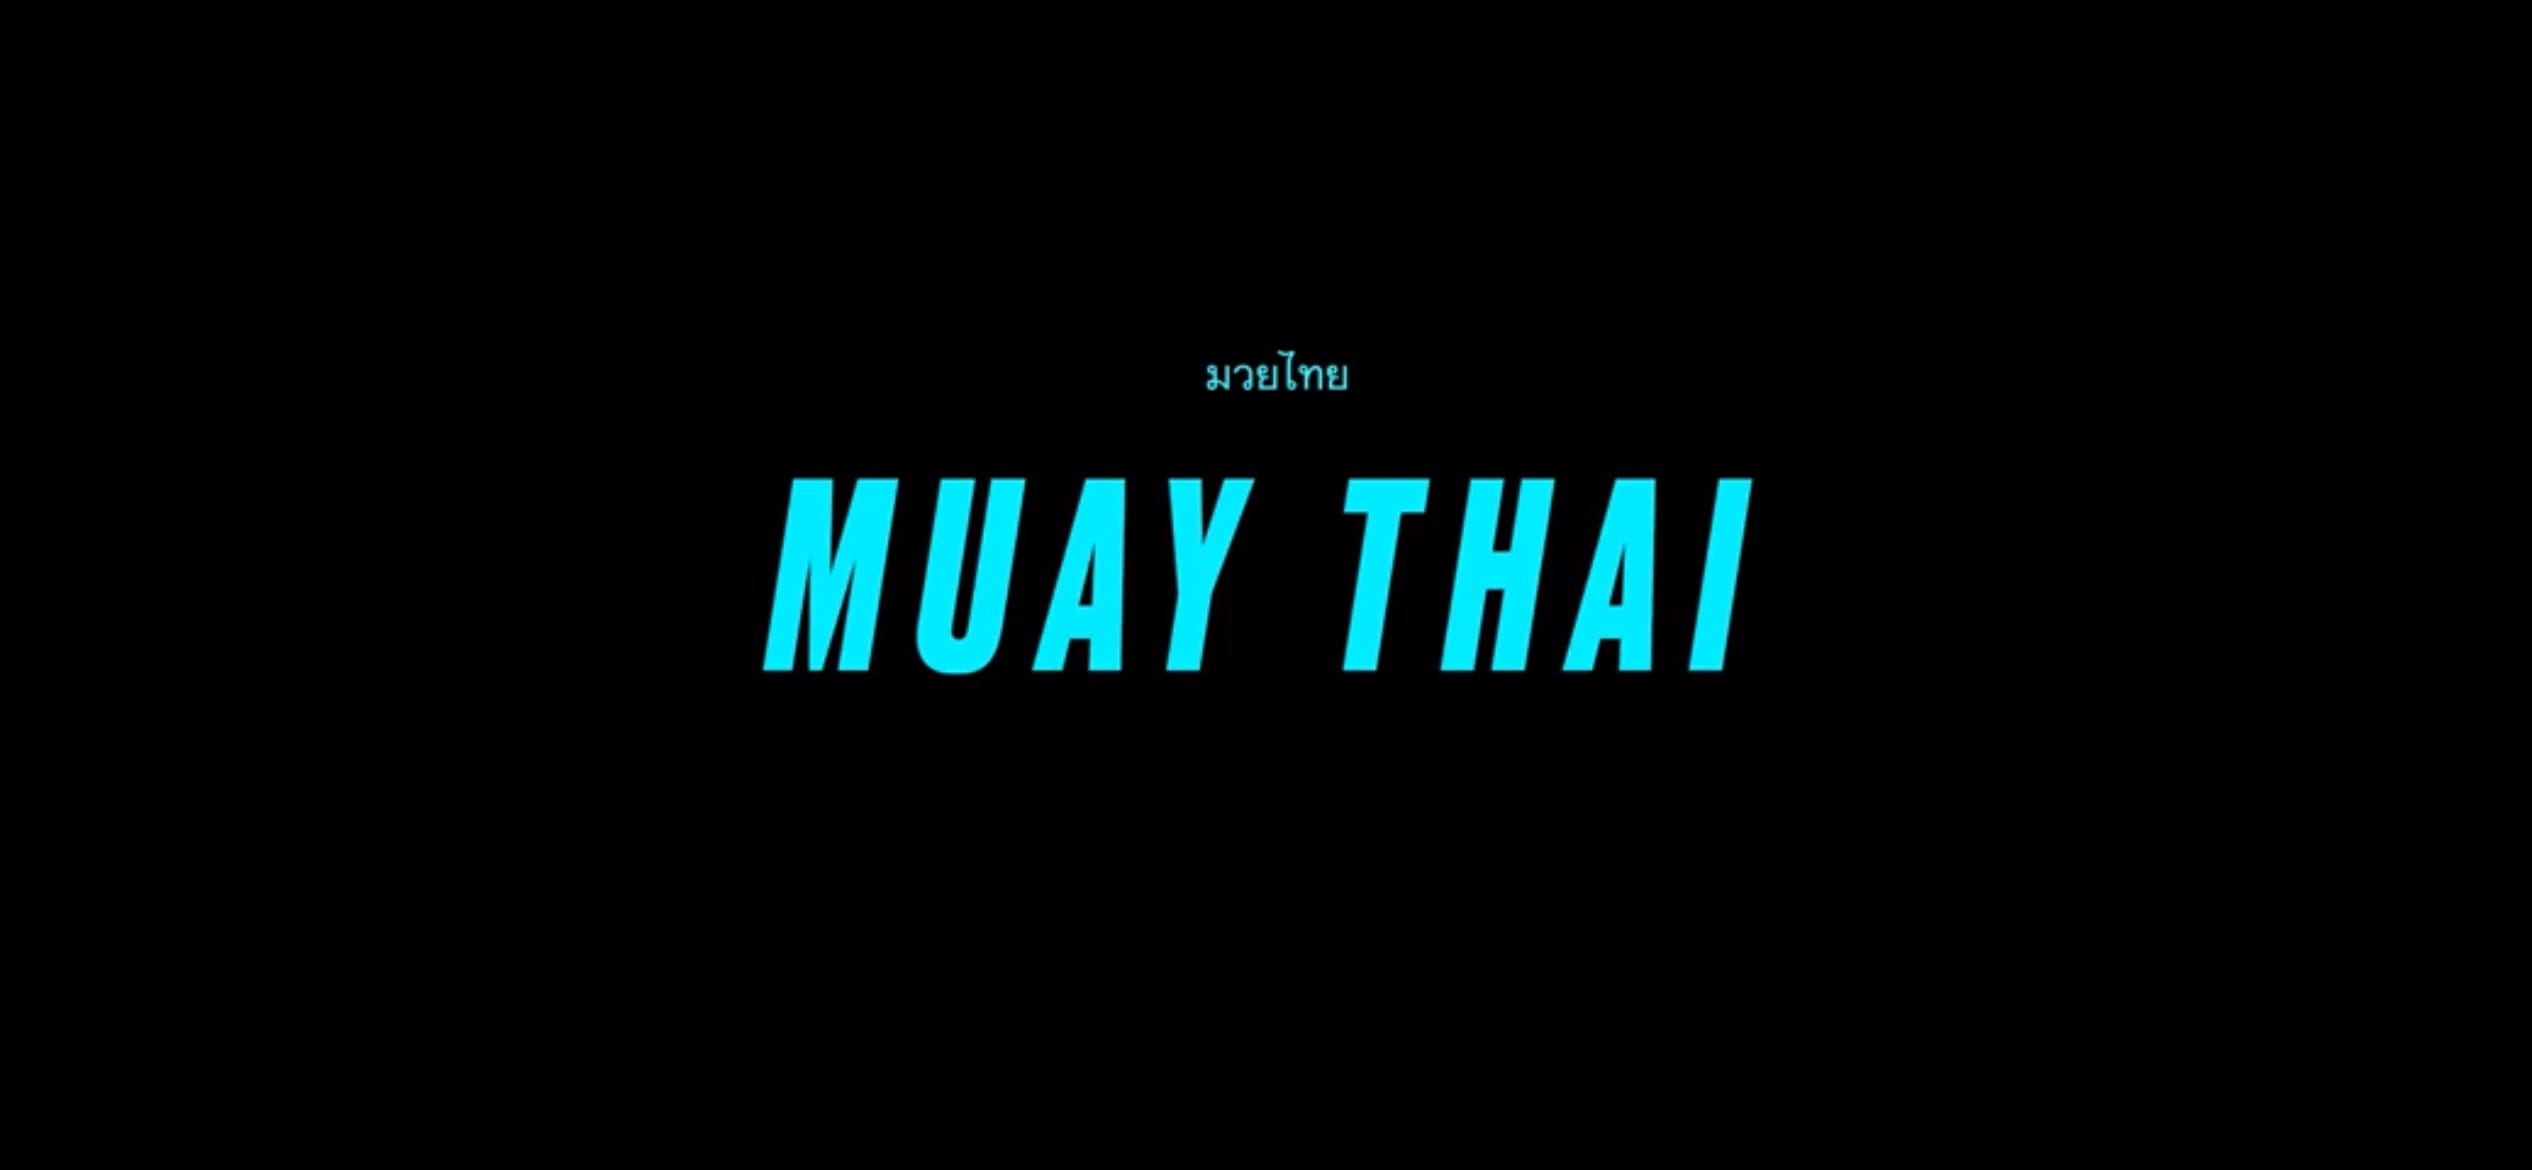 Black background with the words Muay Thai in large blue letters centered Above Muay Thai smaller text in Thai script